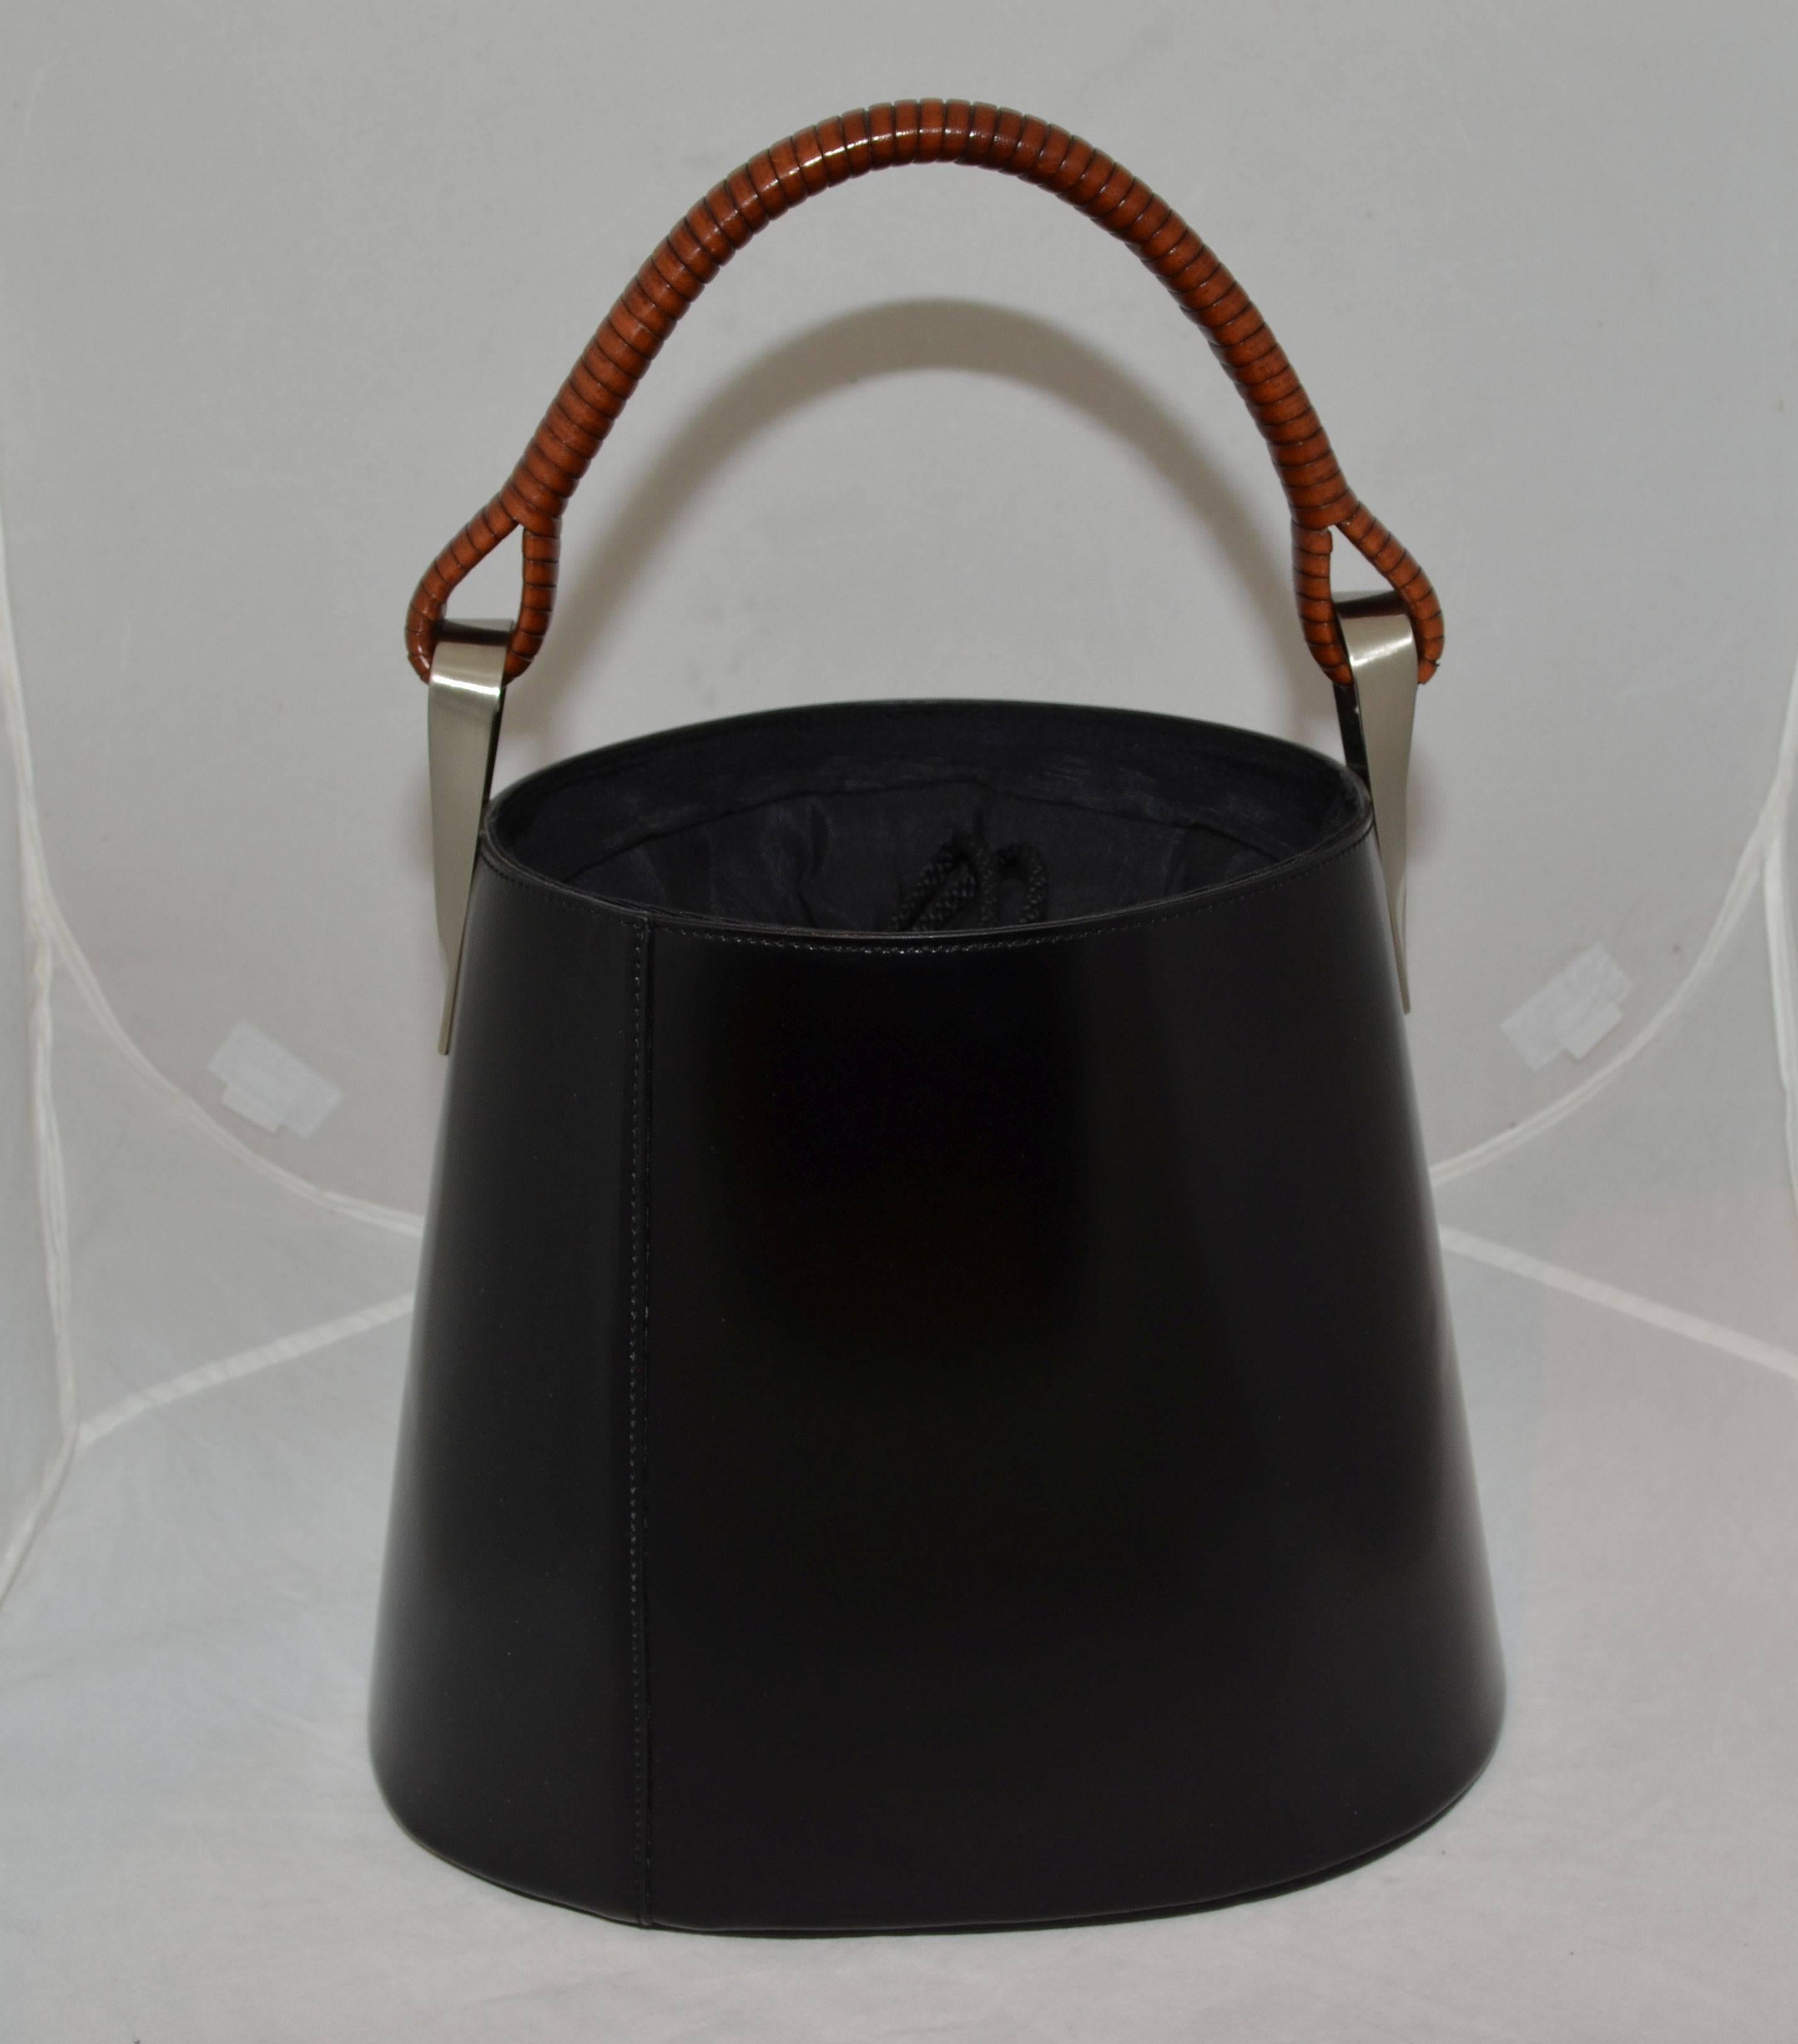 Kenzo Vintage Leather Sac Pagodon 1998 Bucket Bag

Kenzo black leather bucket bag. First introduced in 1998, the Southeast Asia and Japanese inspired Pagodon is one handbag by Kenzo. The bucket bag is functional with a fabric lining and drawstring